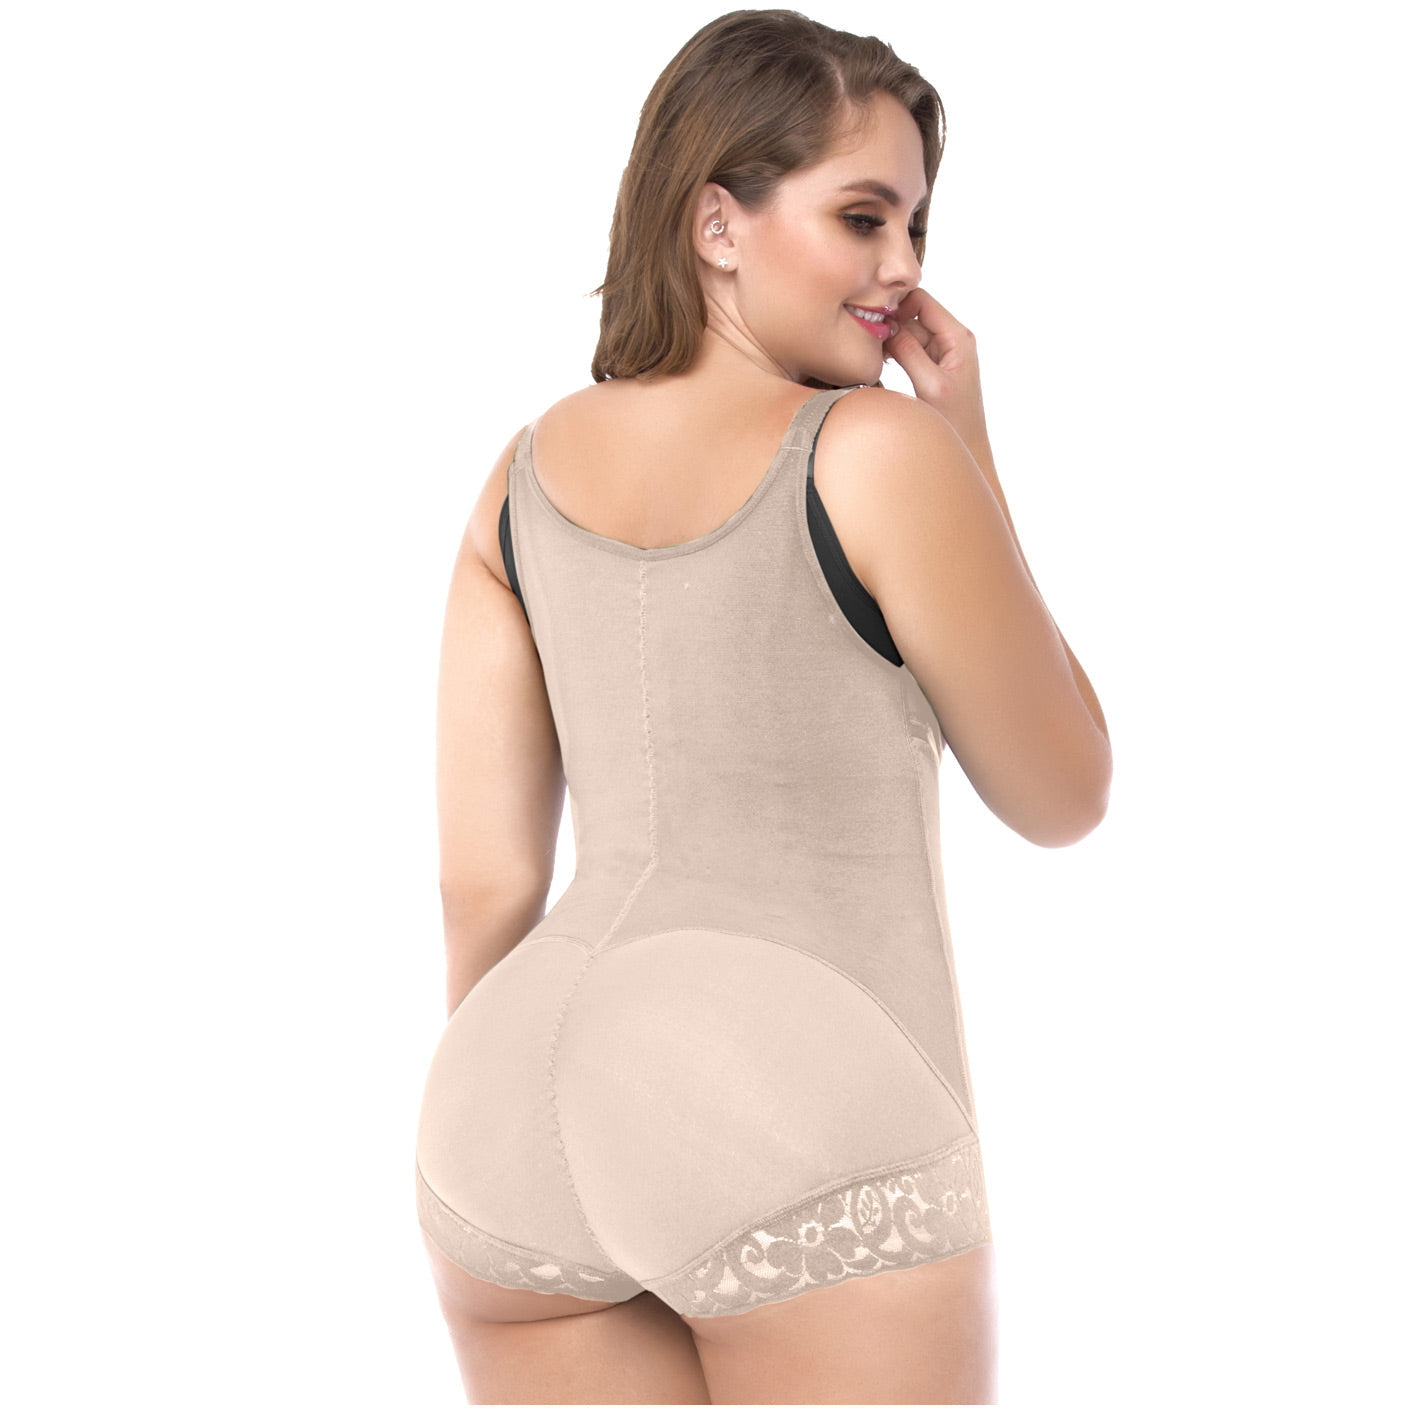 UpLady 6153 -  Women's Butt Lifting Shapewear Bodysuit for Daily Use